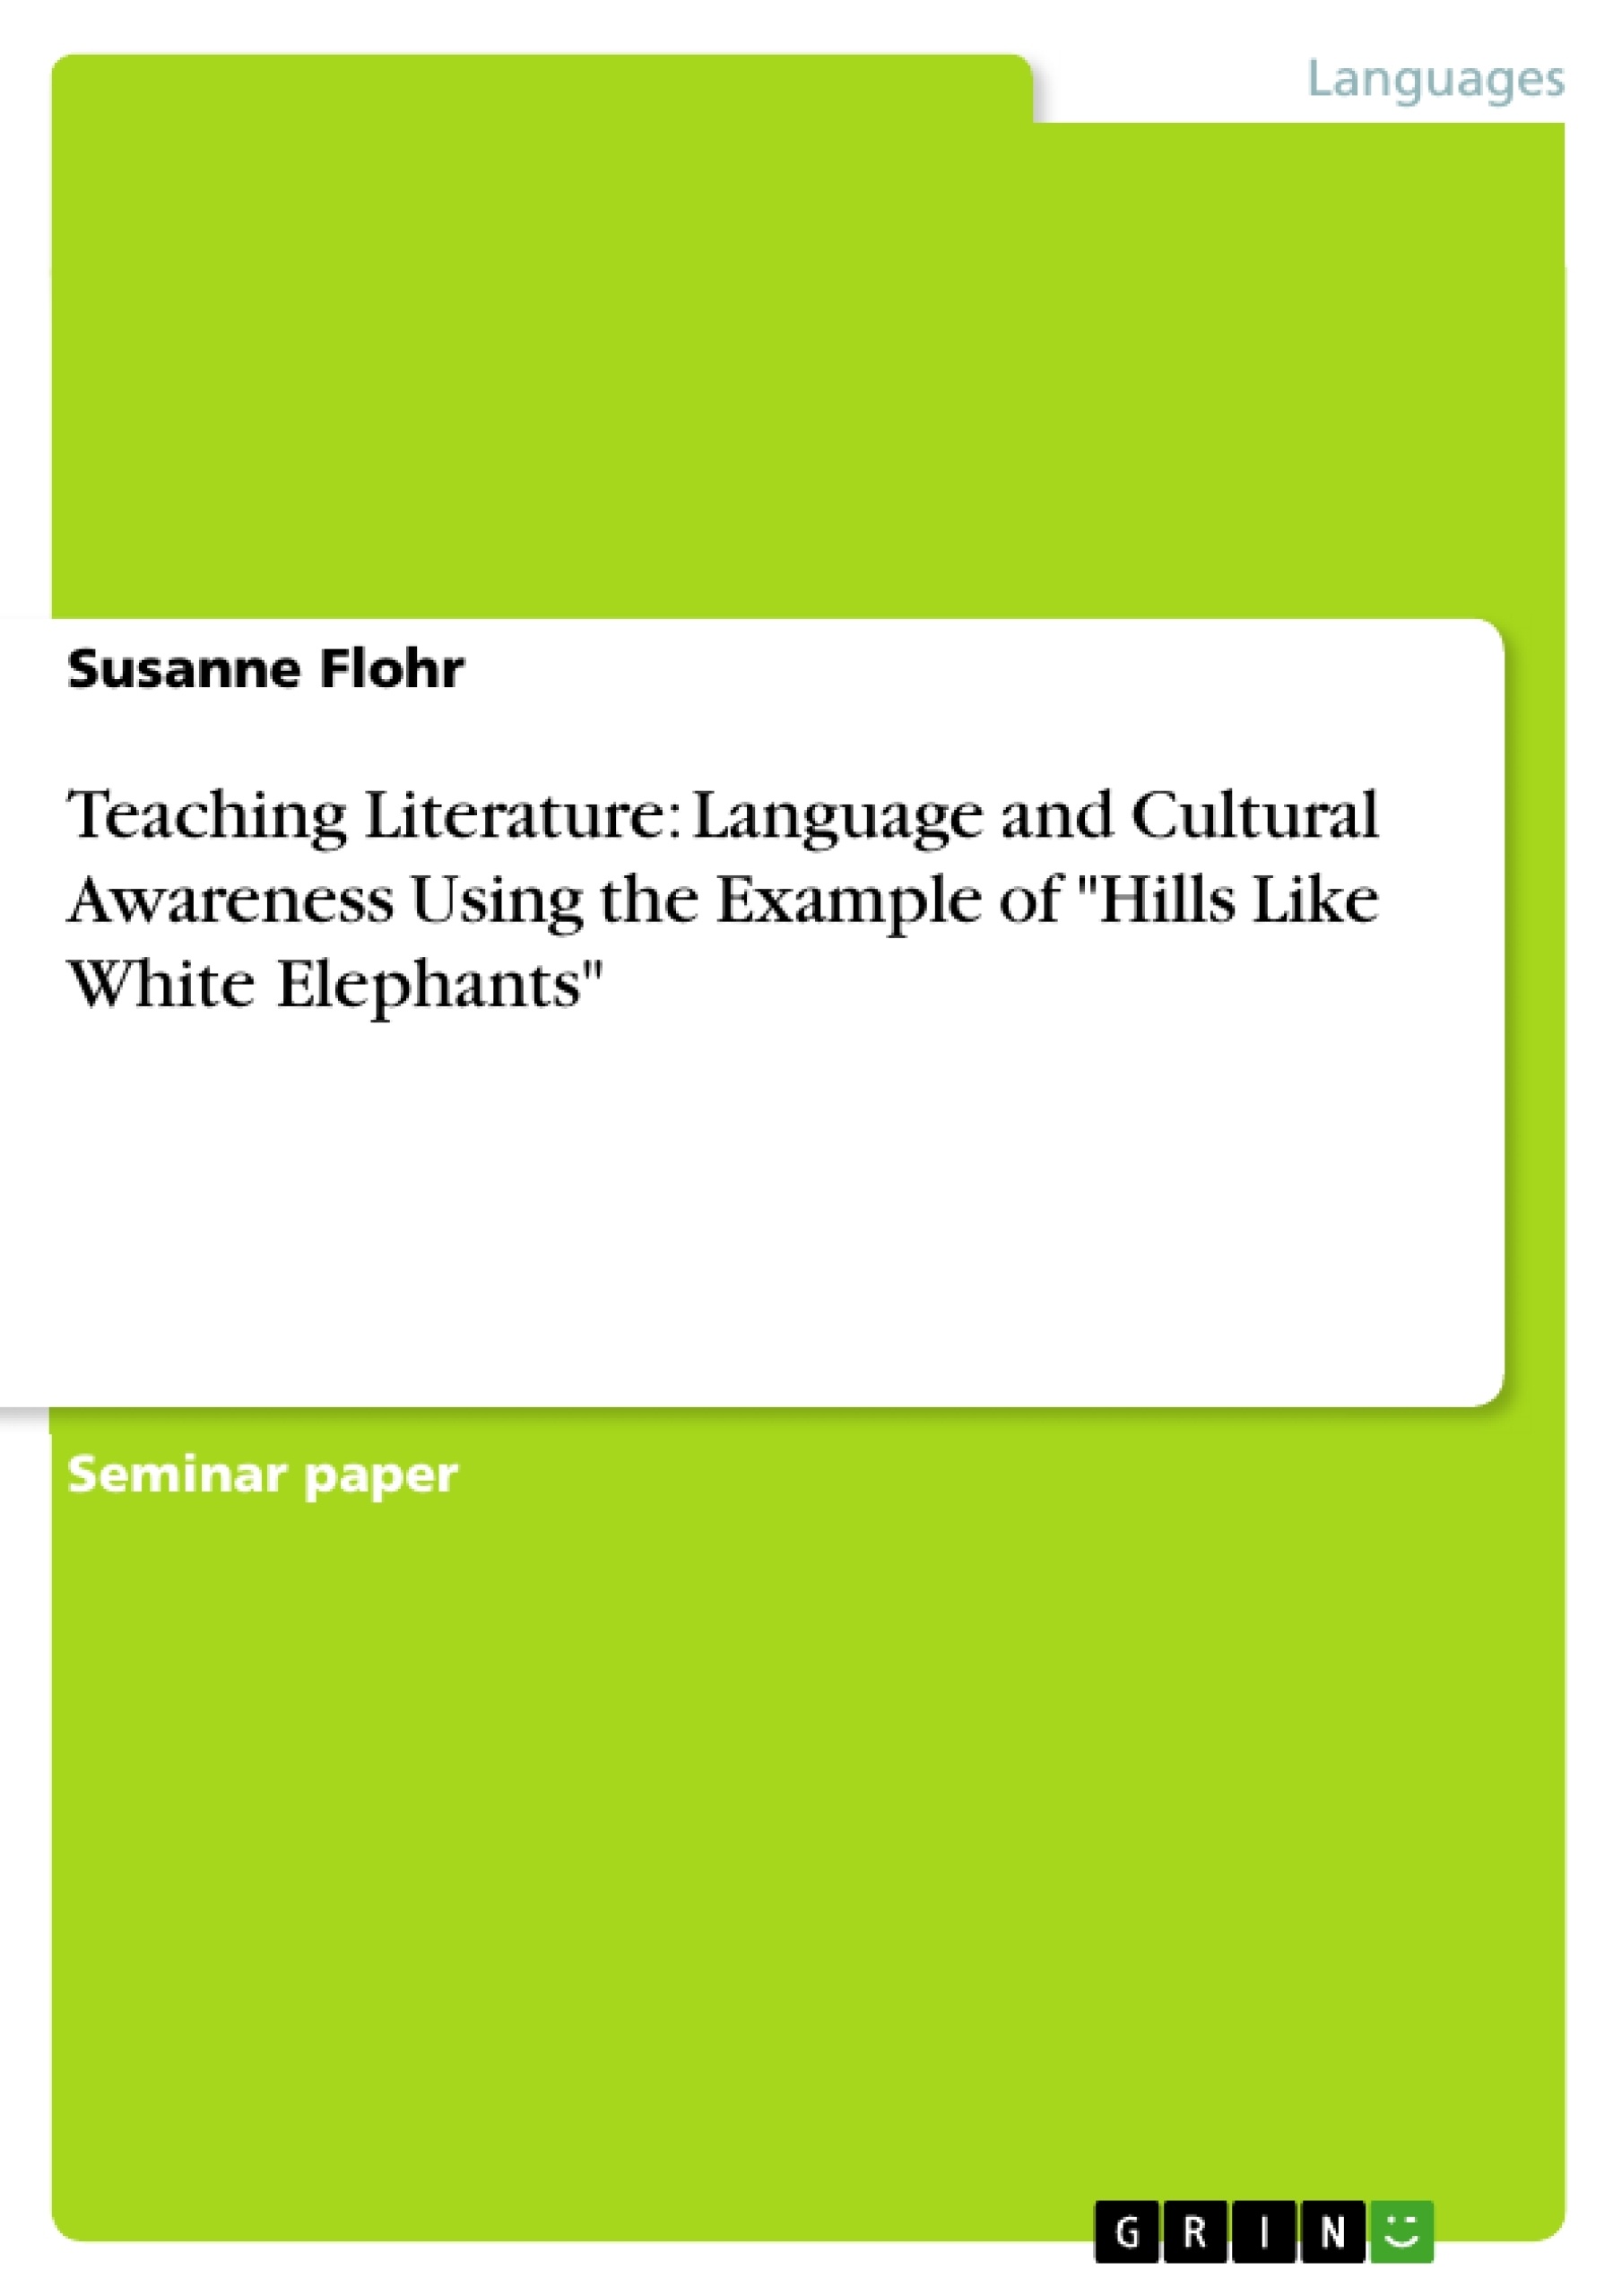 Title: Teaching Literature: Language and Cultural Awareness Using the Example of "Hills Like White Elephants"